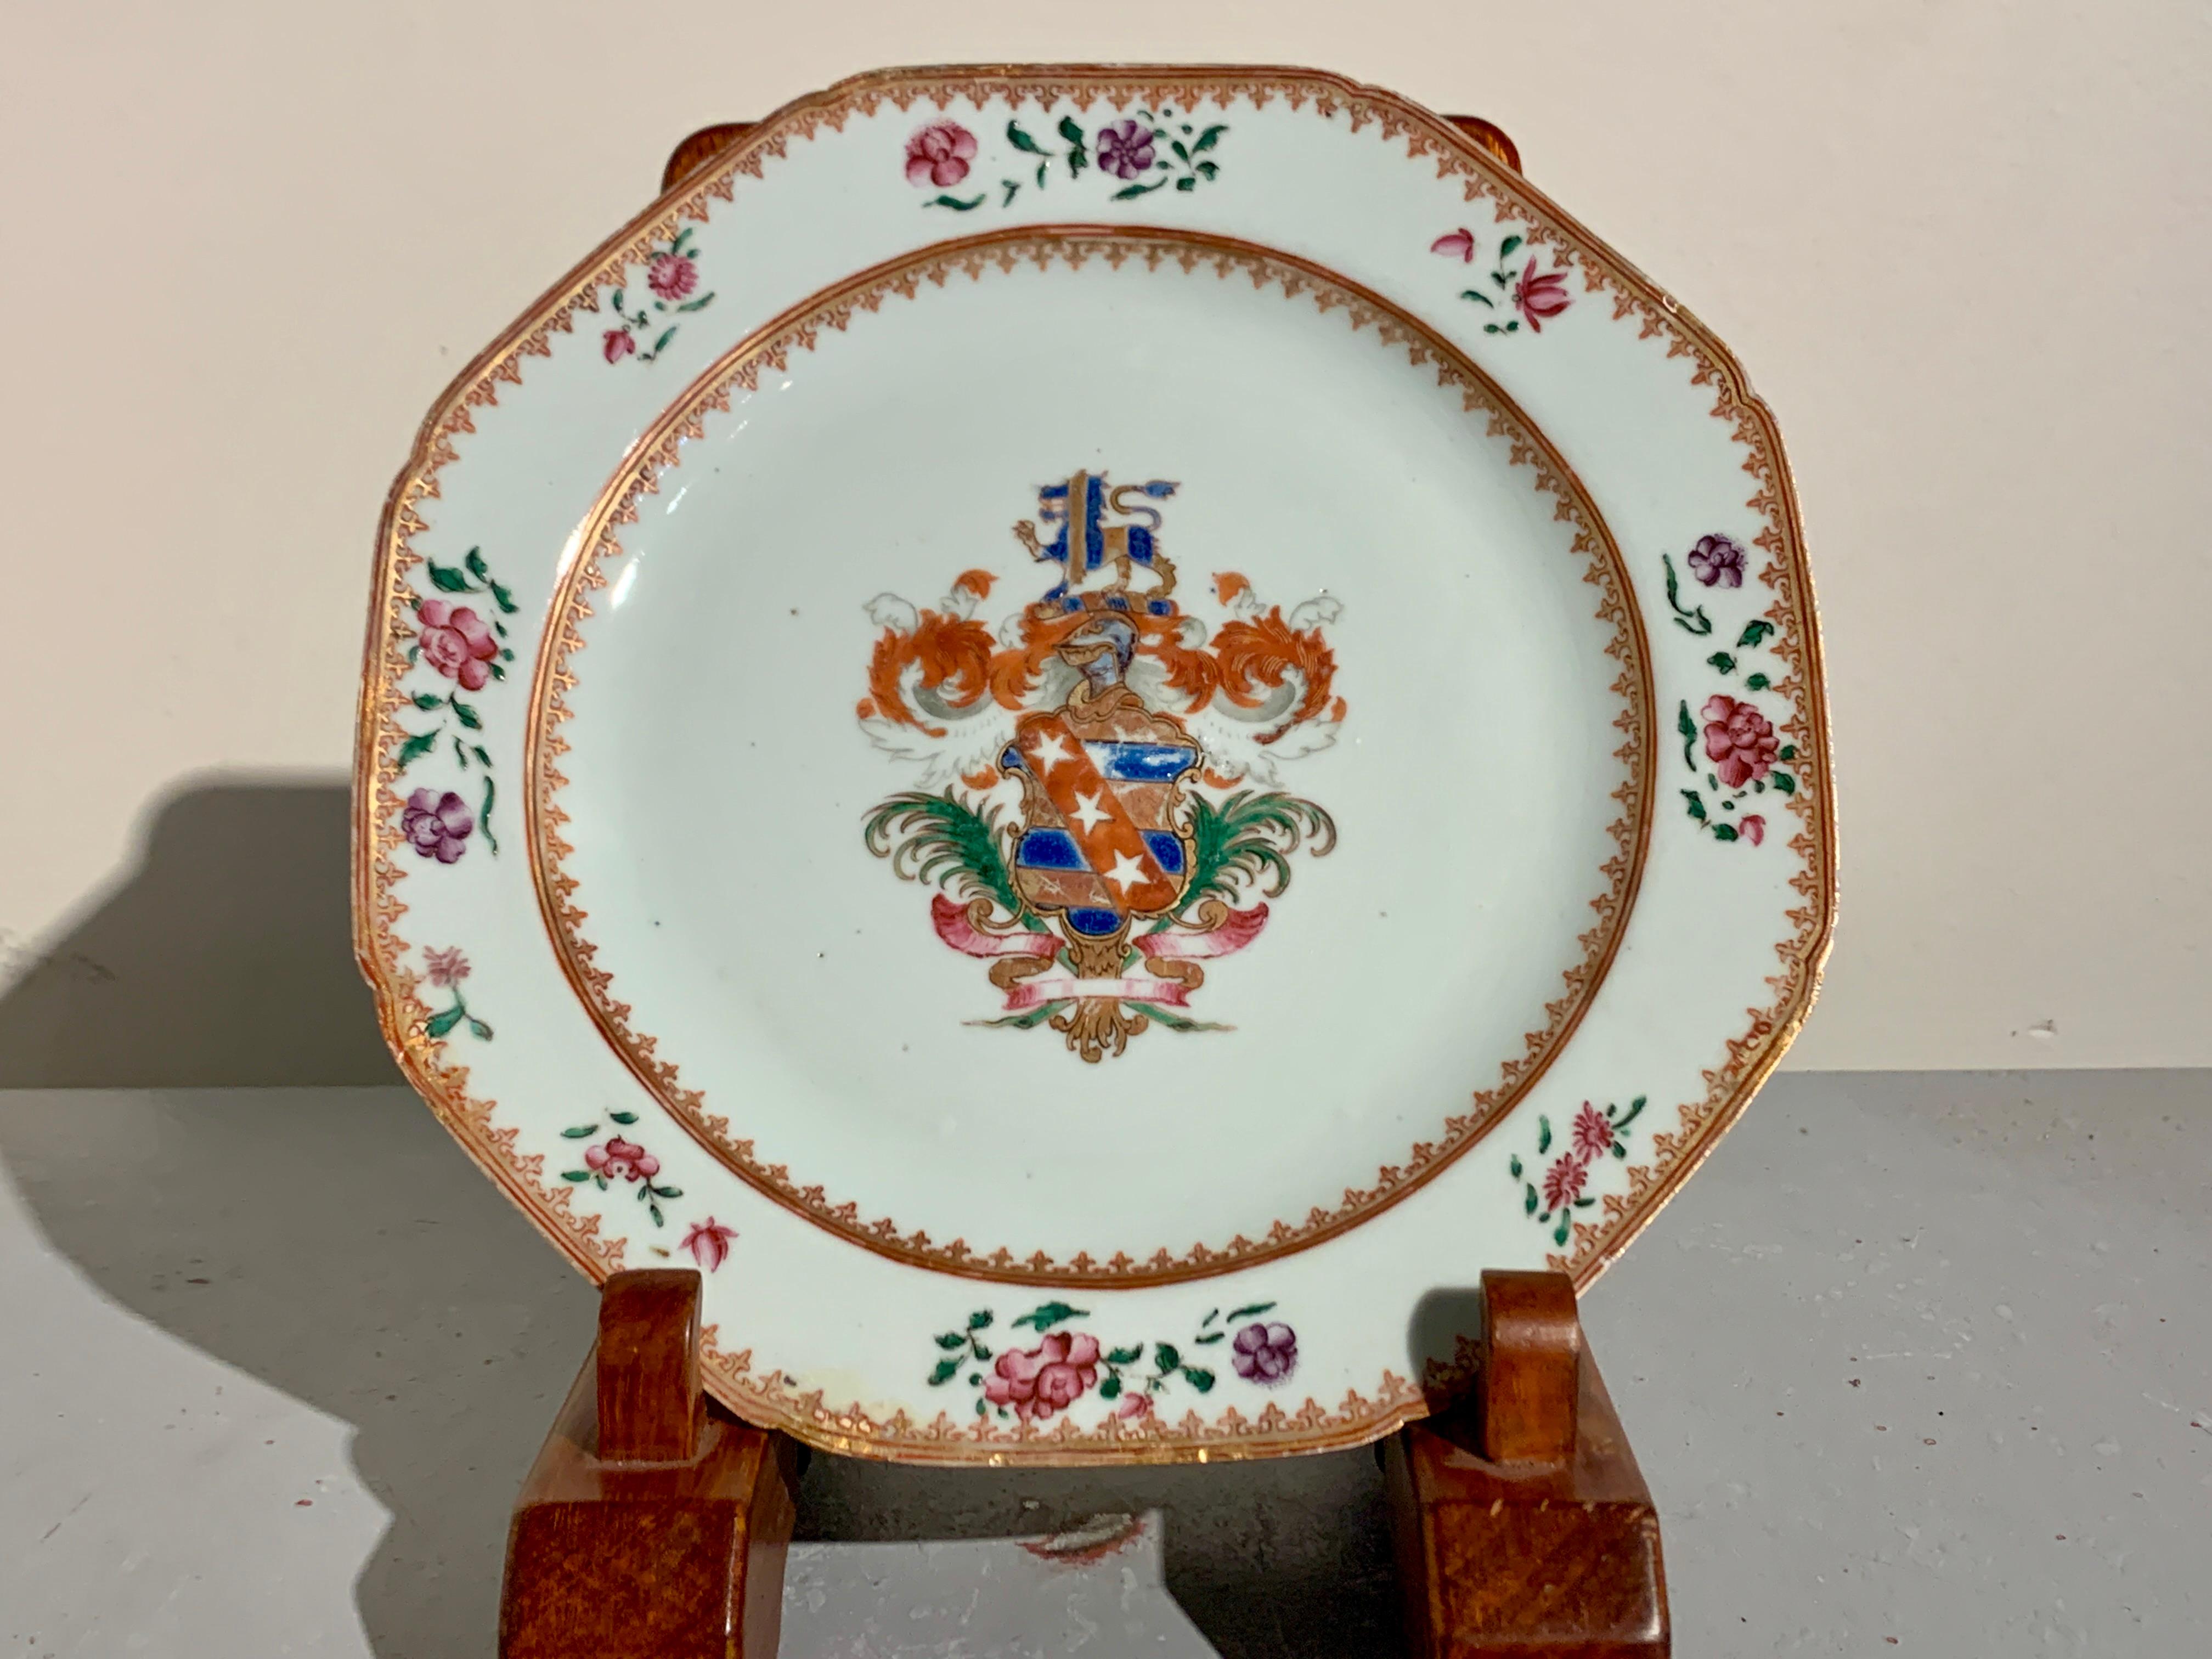 Pair Chinese Export Porcelain Permbridge Armorial Plates, mid 18th c, China For Sale 1